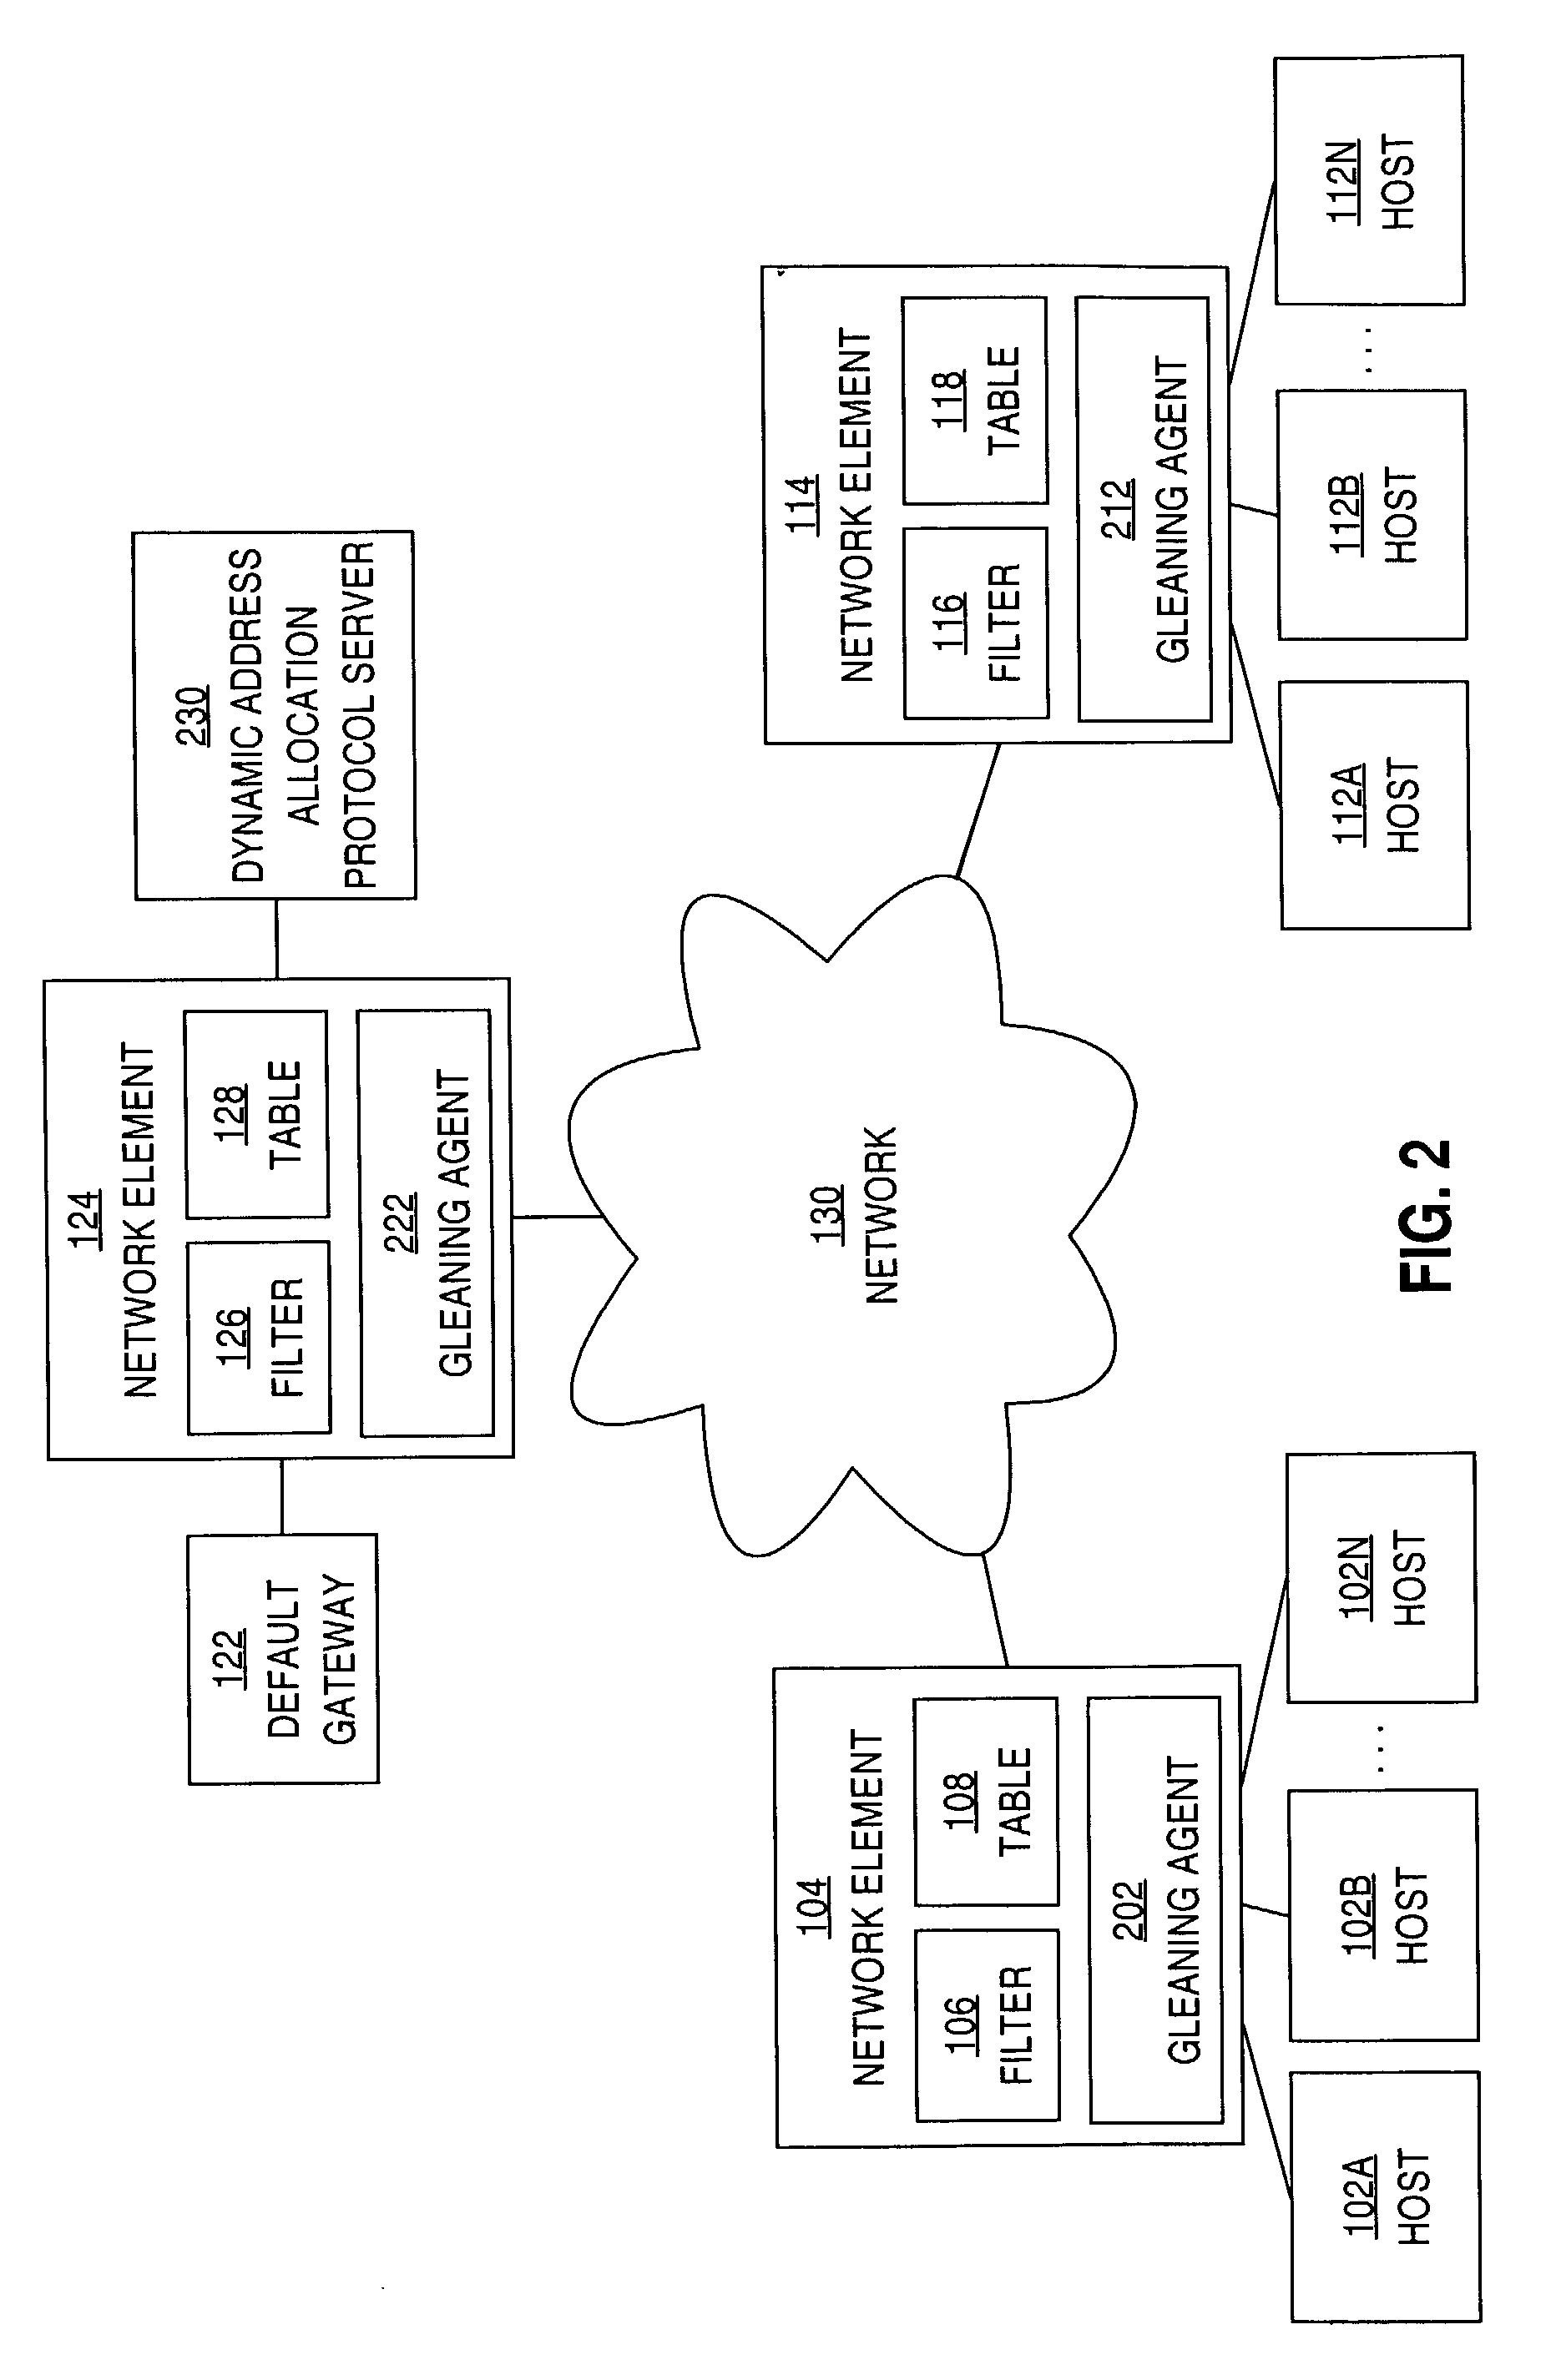 Method and apparatus for automatic filter generation and maintenance